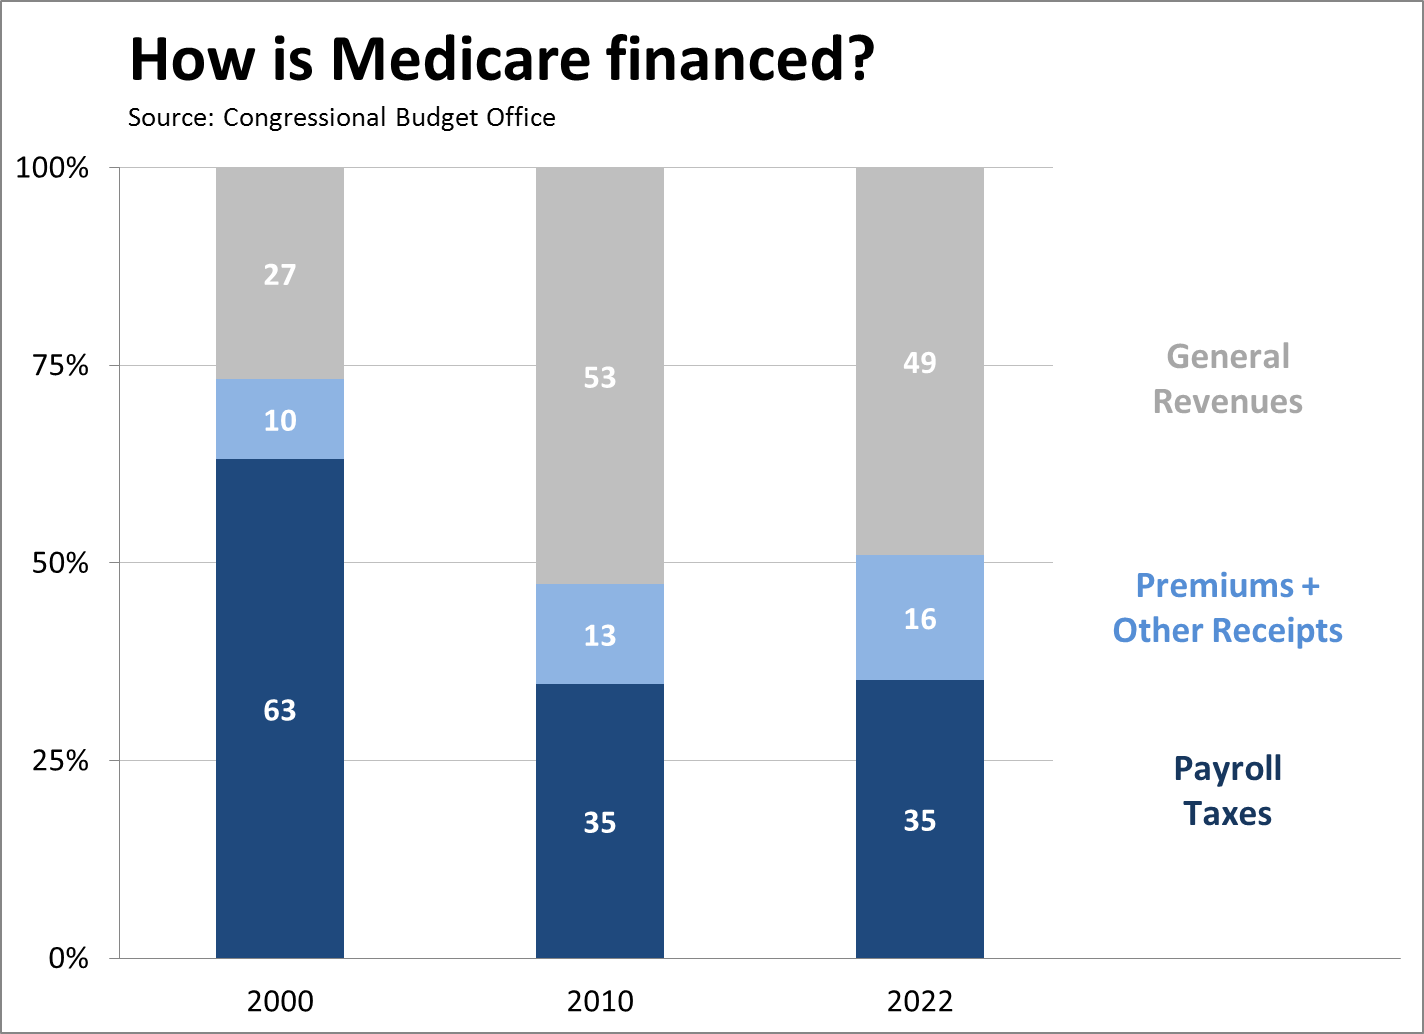 Payroll Taxes Cover About a Third of Medicare Costs | Tax Policy Center